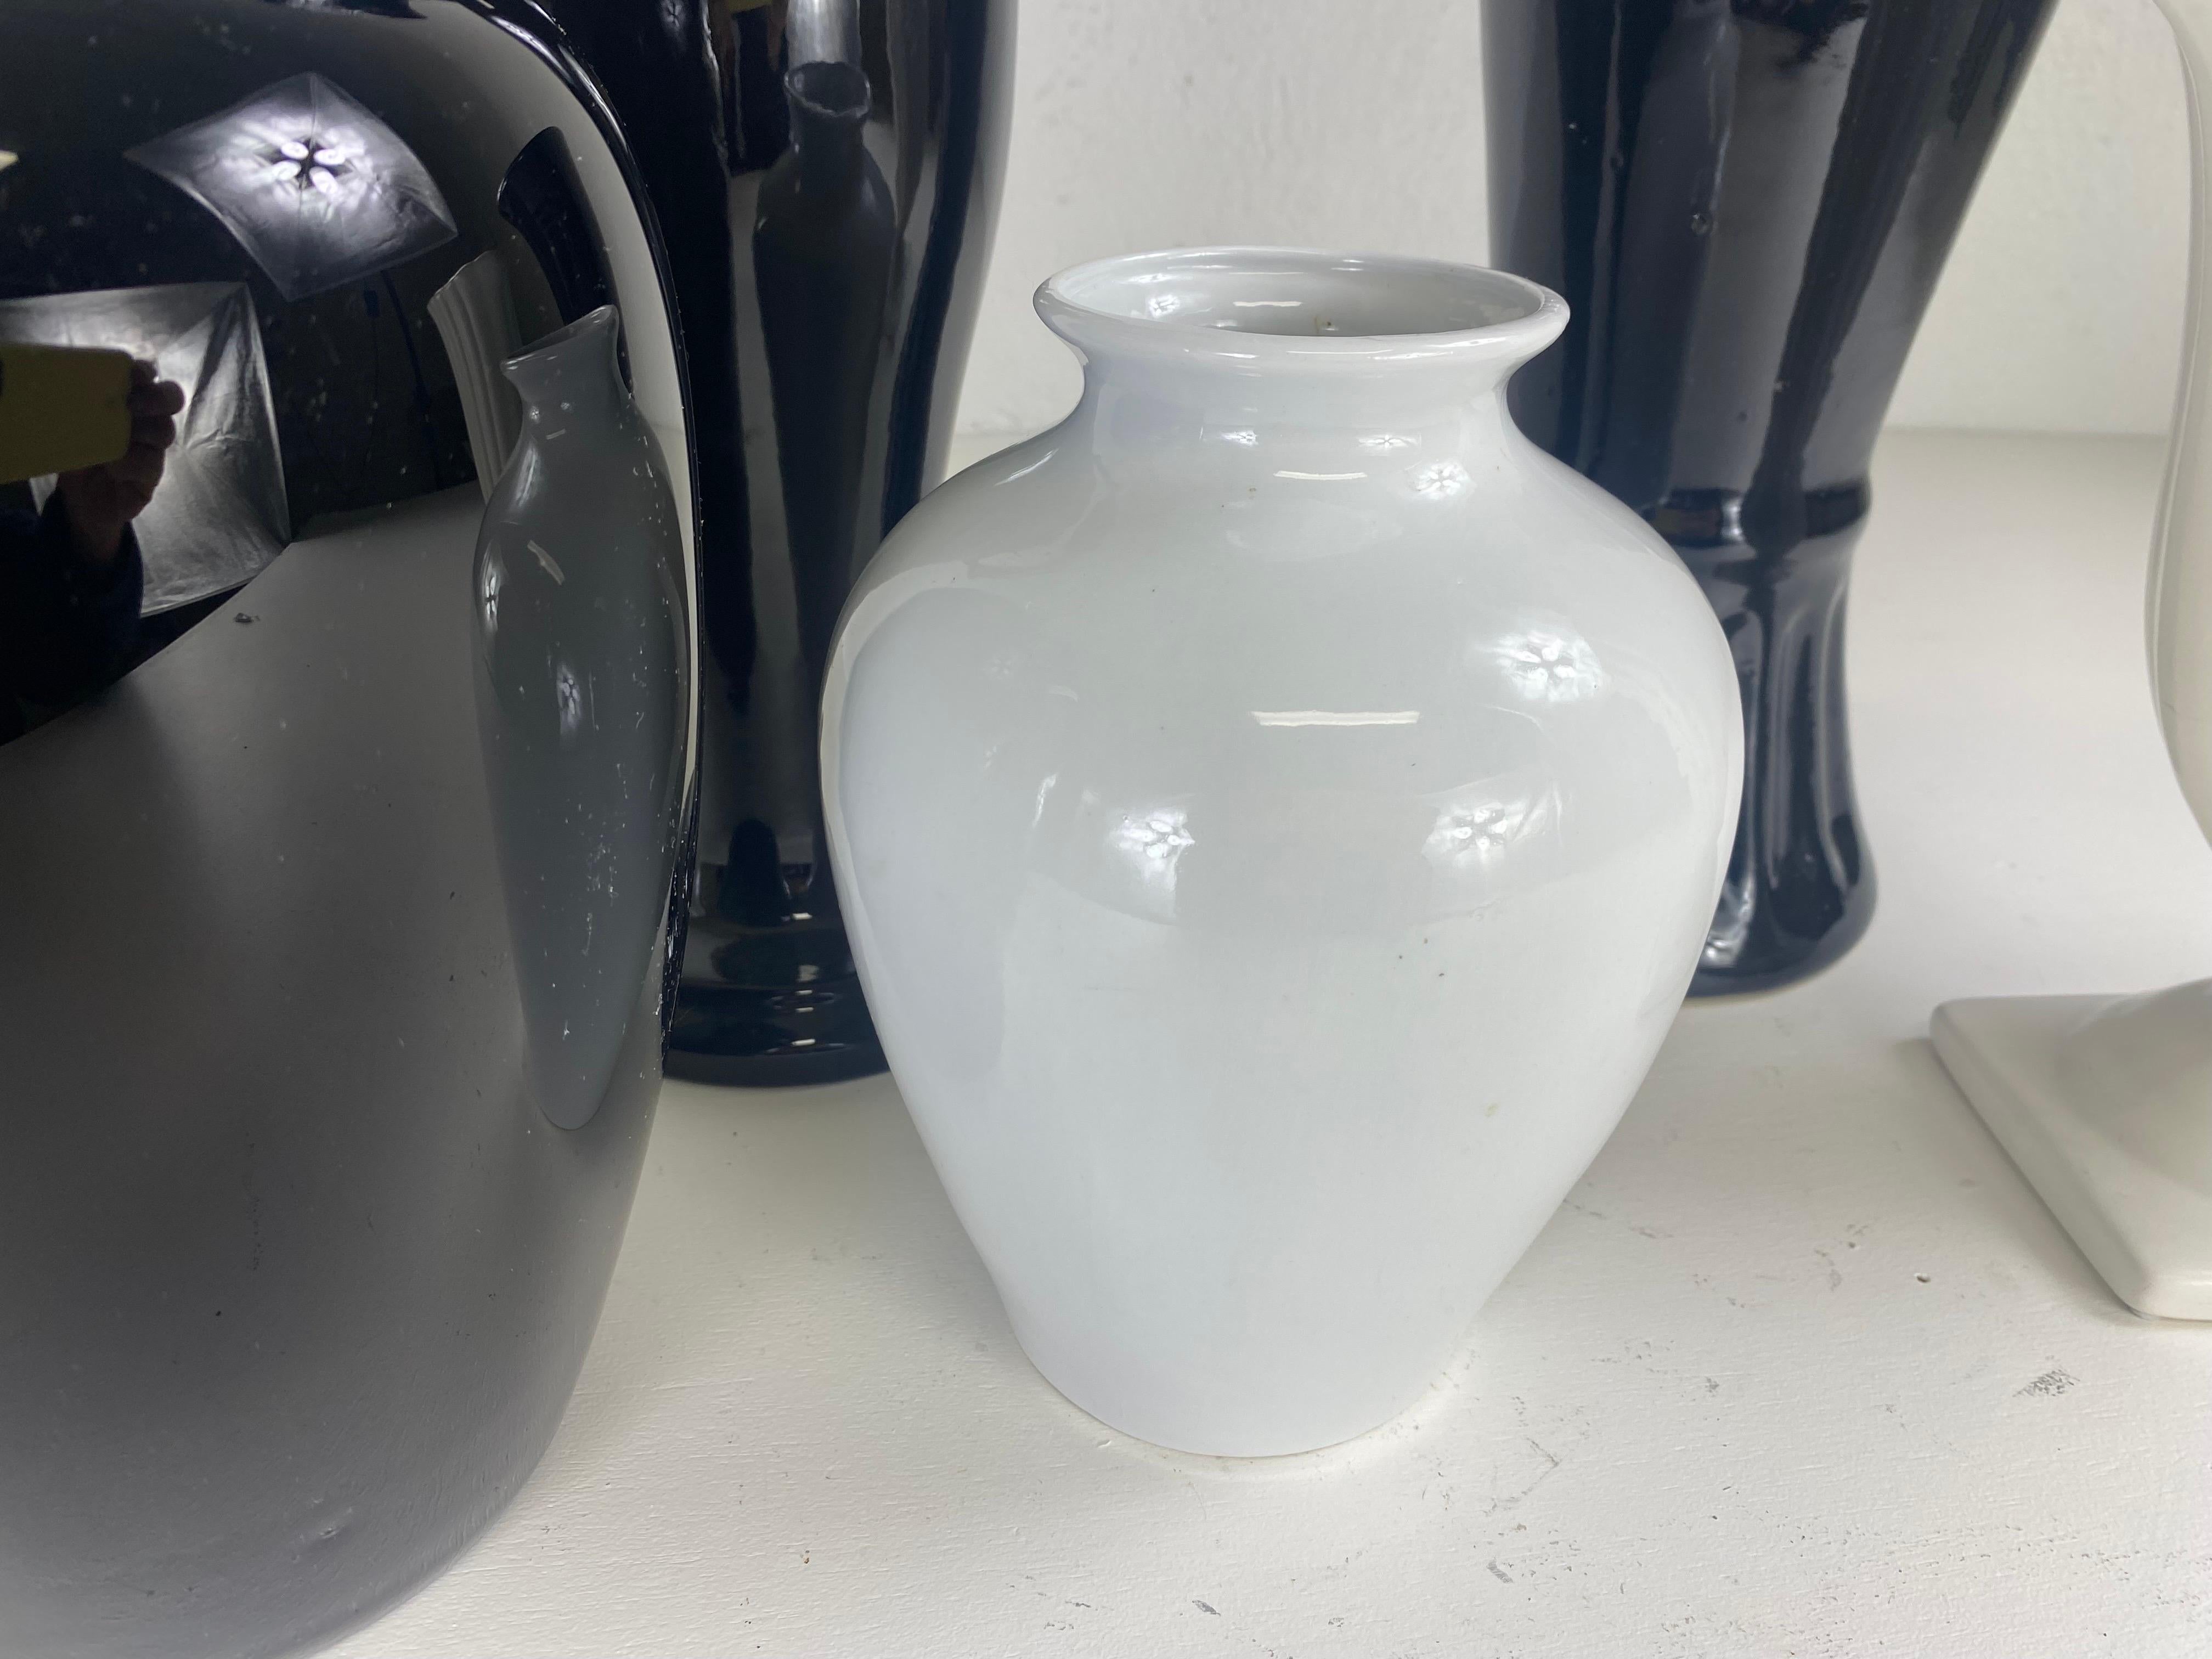 This is a complementary grouping of black and white mid century pottery vases. Please note the vases measurements from left to right the small white vase on the left end is 5 1/2×5 1/2×10. The round black vase in front next to it is 7 1/2×7 1/2×10.